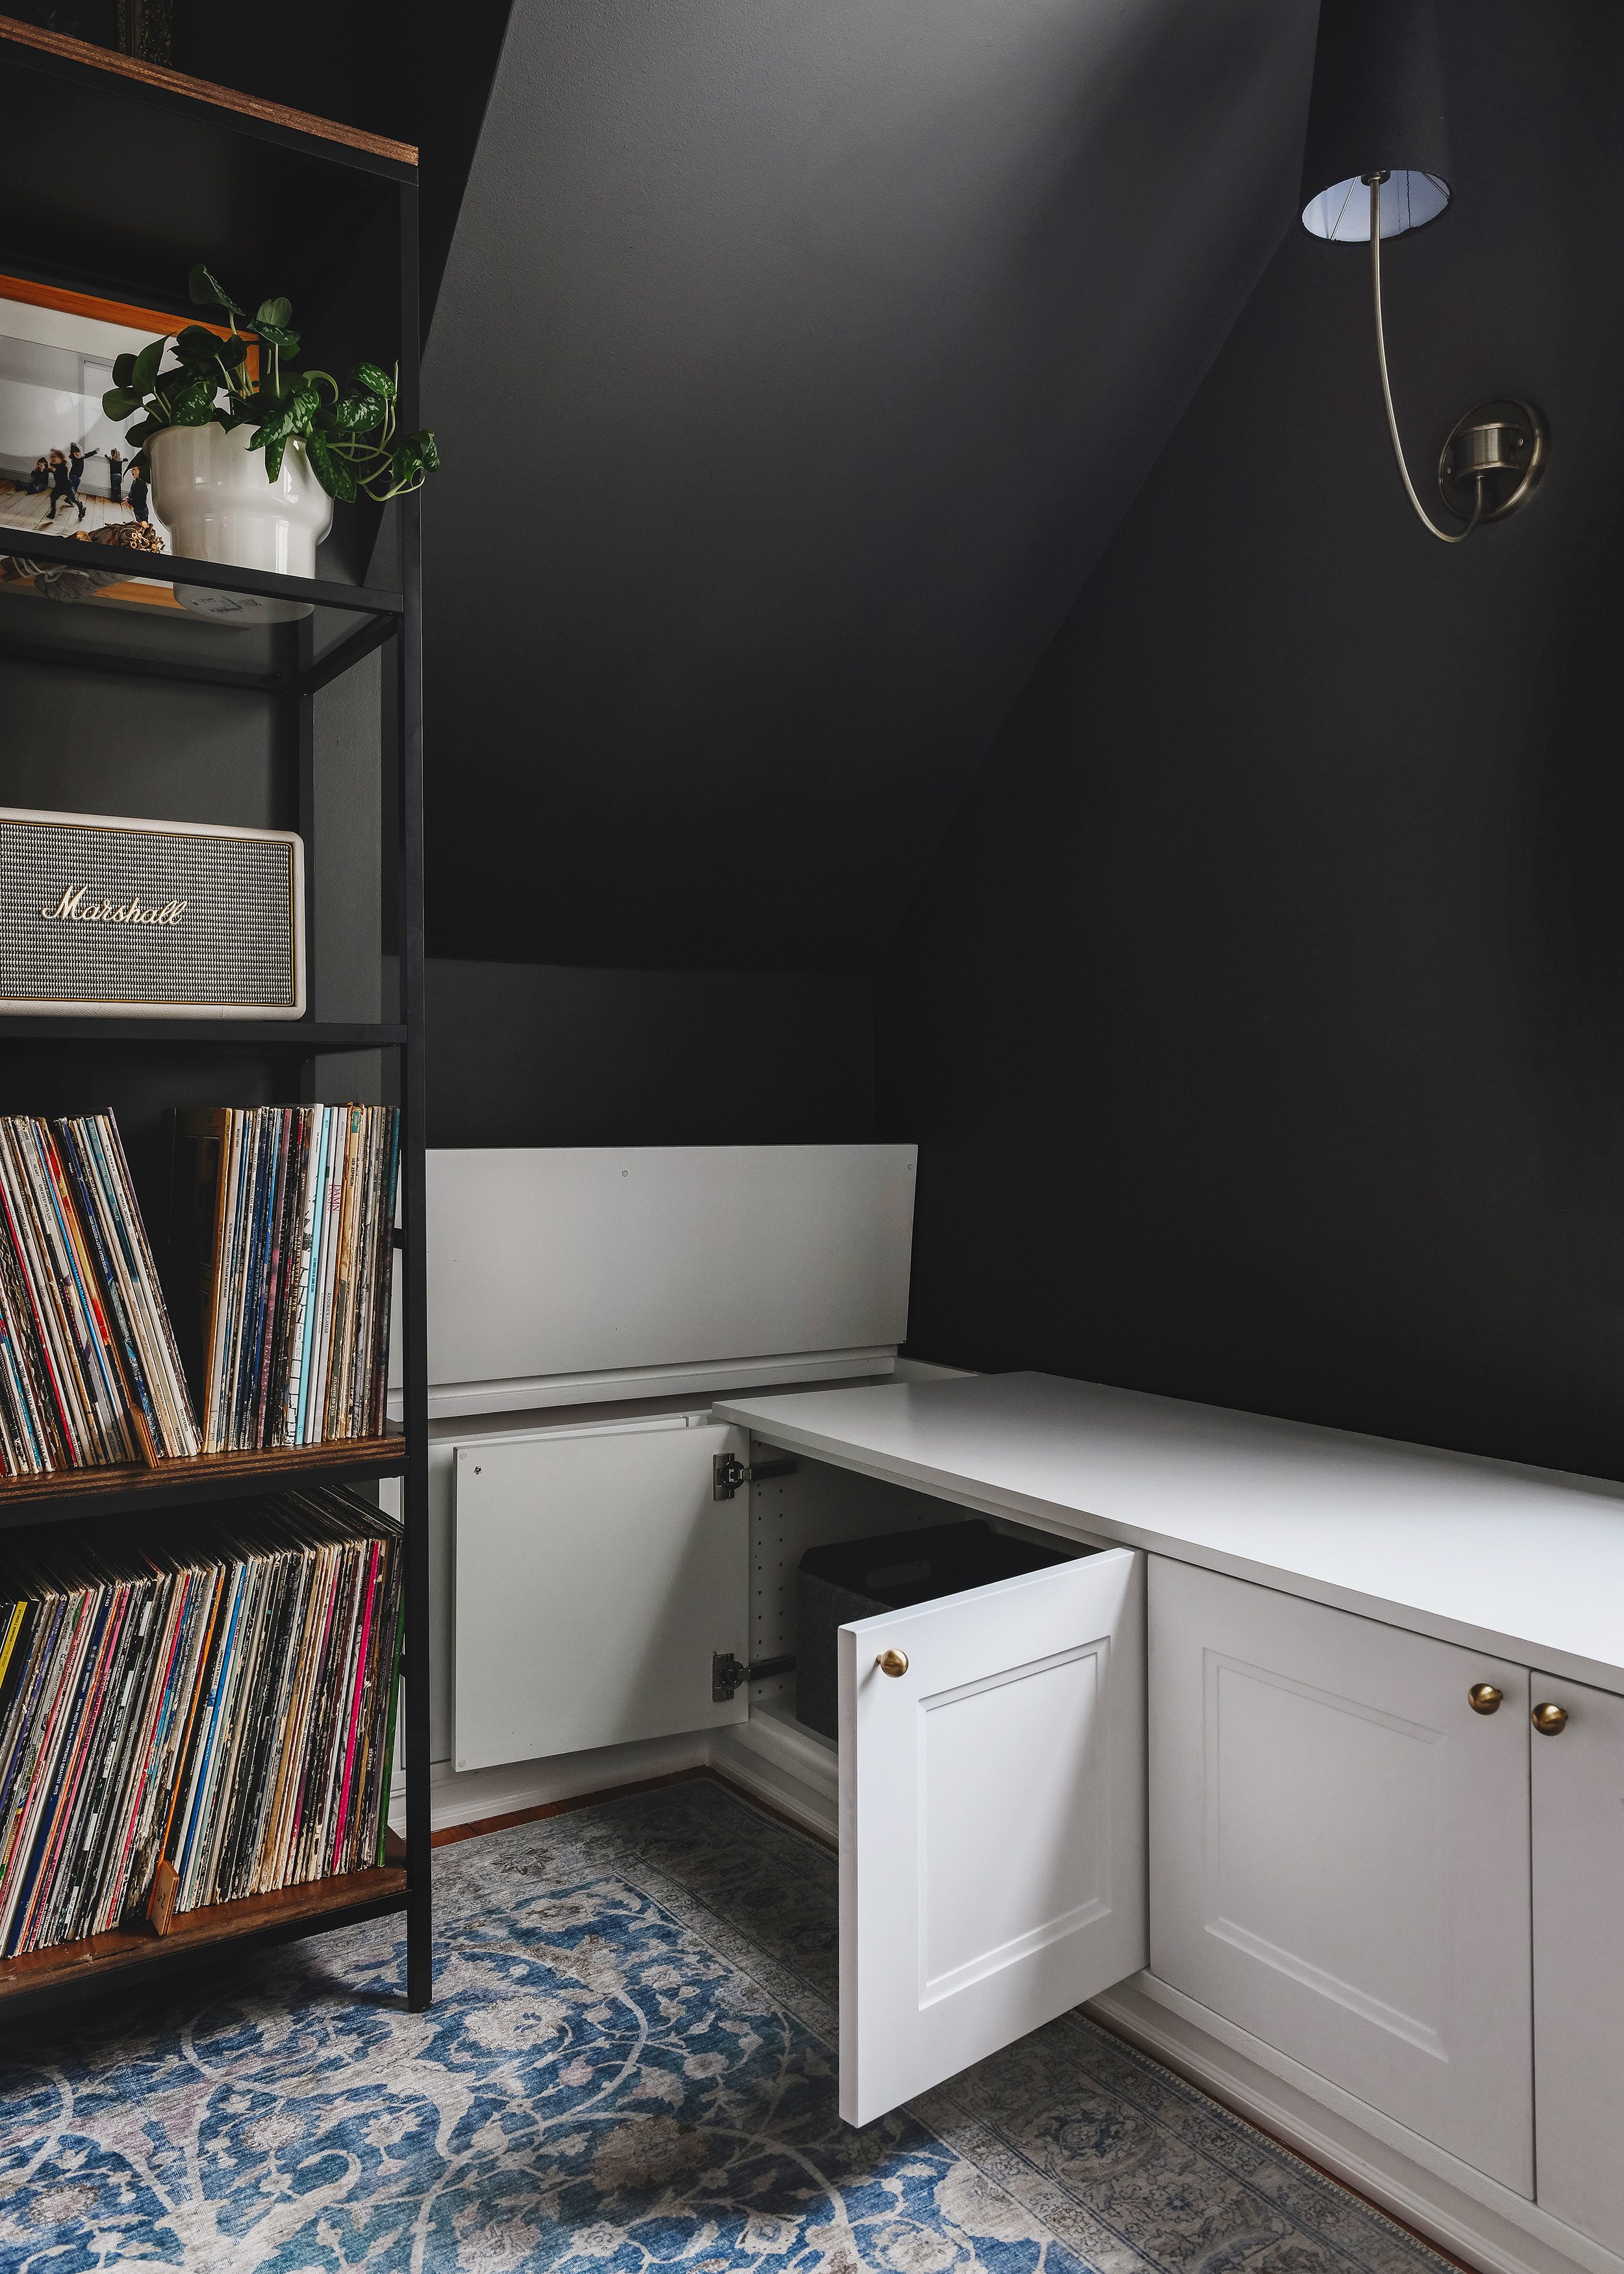 The built in with toy box lid and far left cabinet doors open. There is a TON of storage space // via Yellow Brick Home